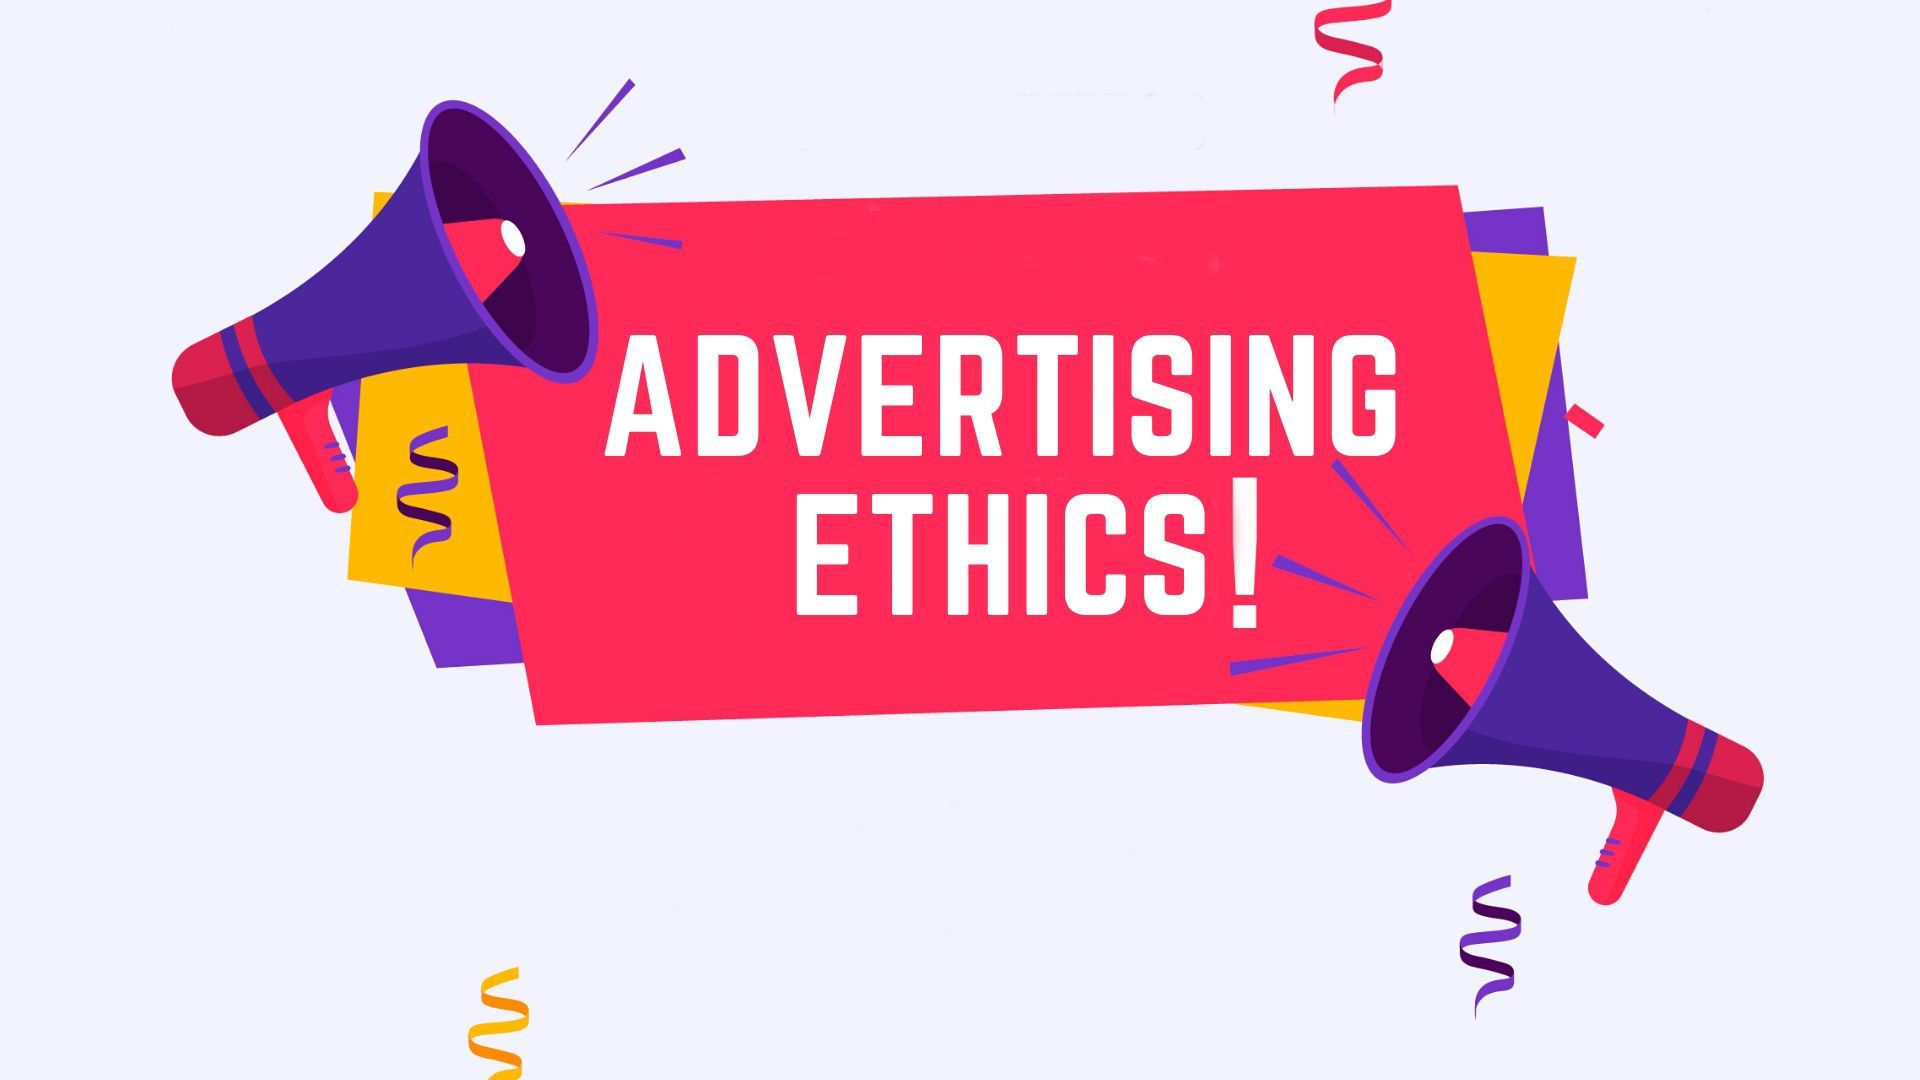 What is Ethical Advertising?